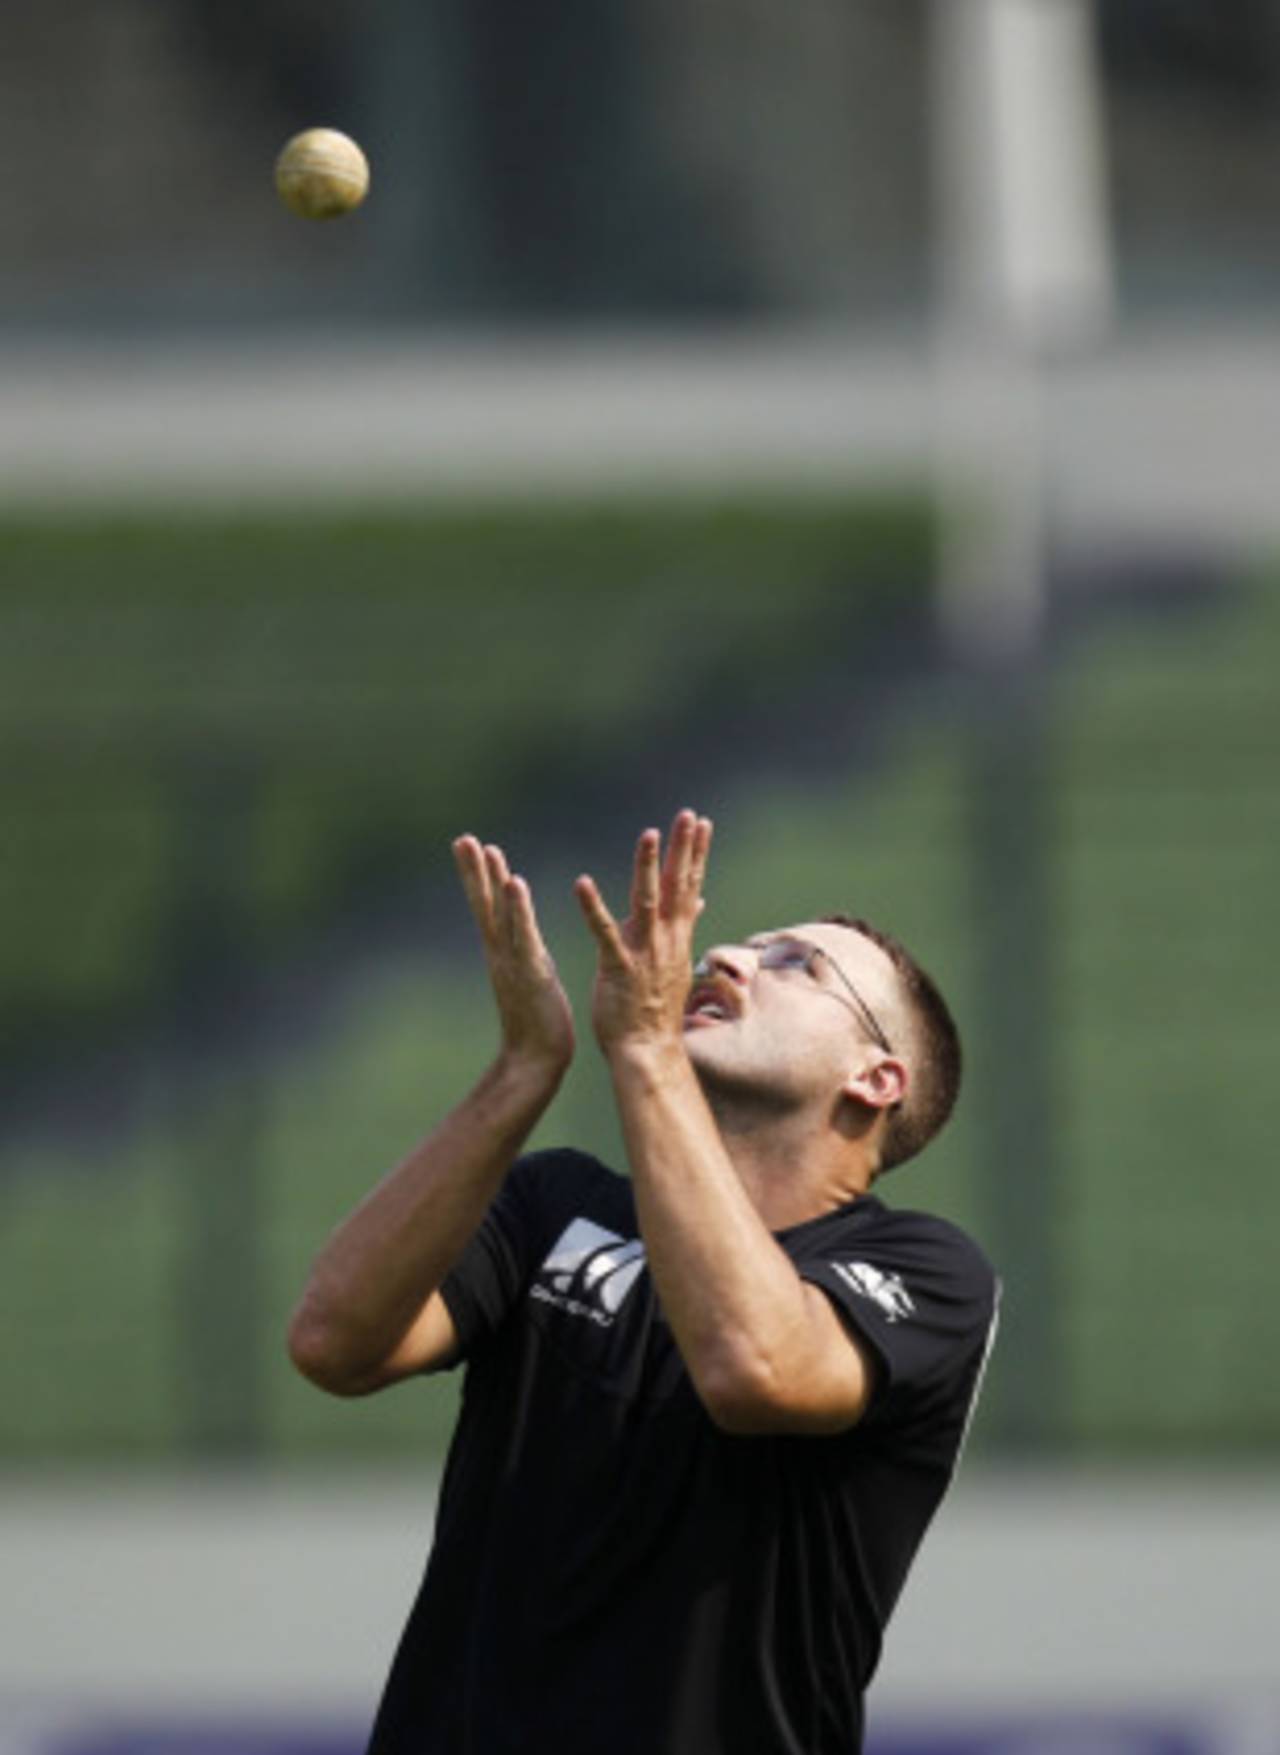 Daniel Vettori lines up to take a catch during practice, Dhaka, March 24, 2011